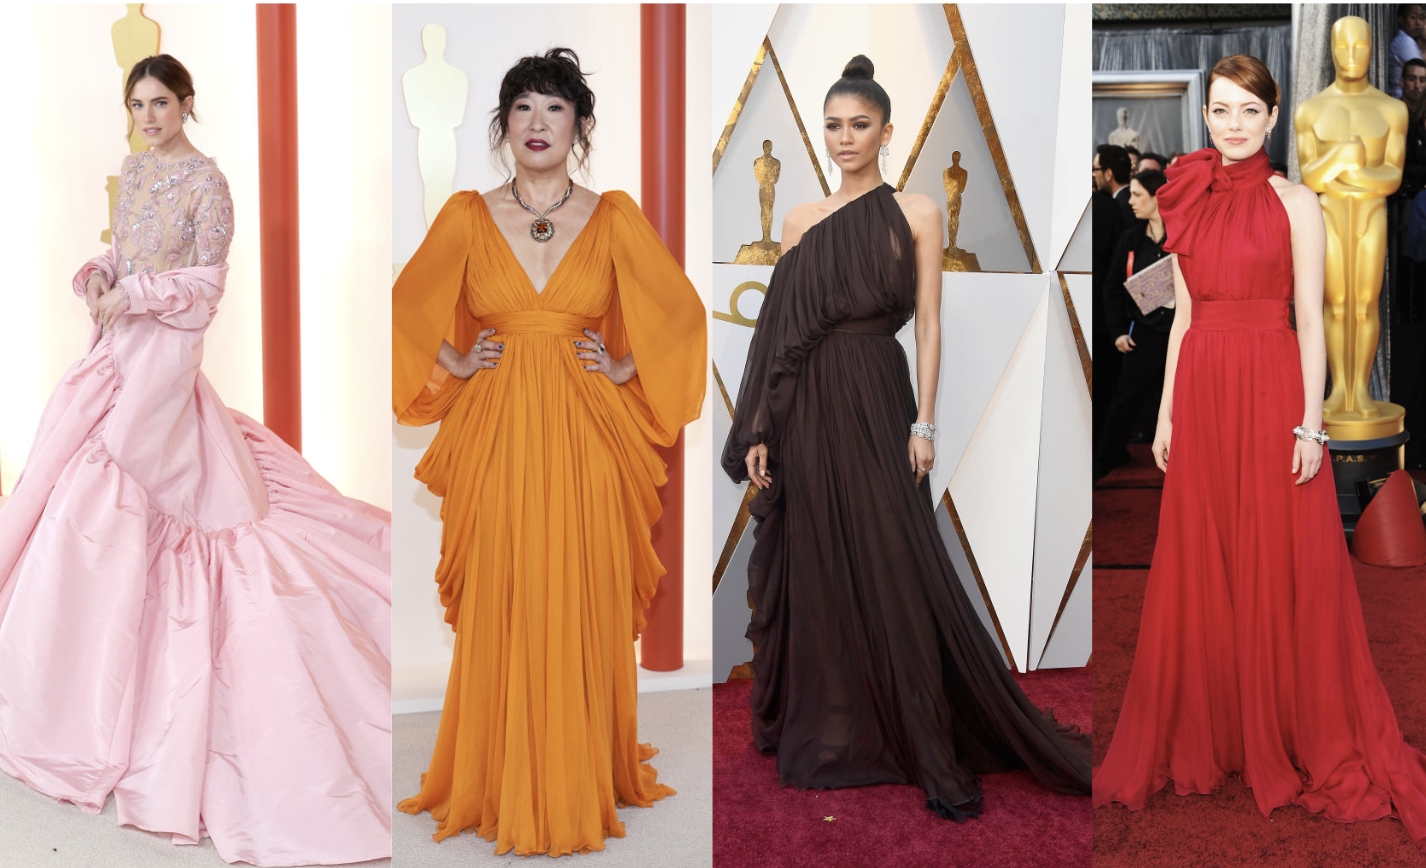 Four women in elegant gowns at a red carpet event, each with unique dress styles